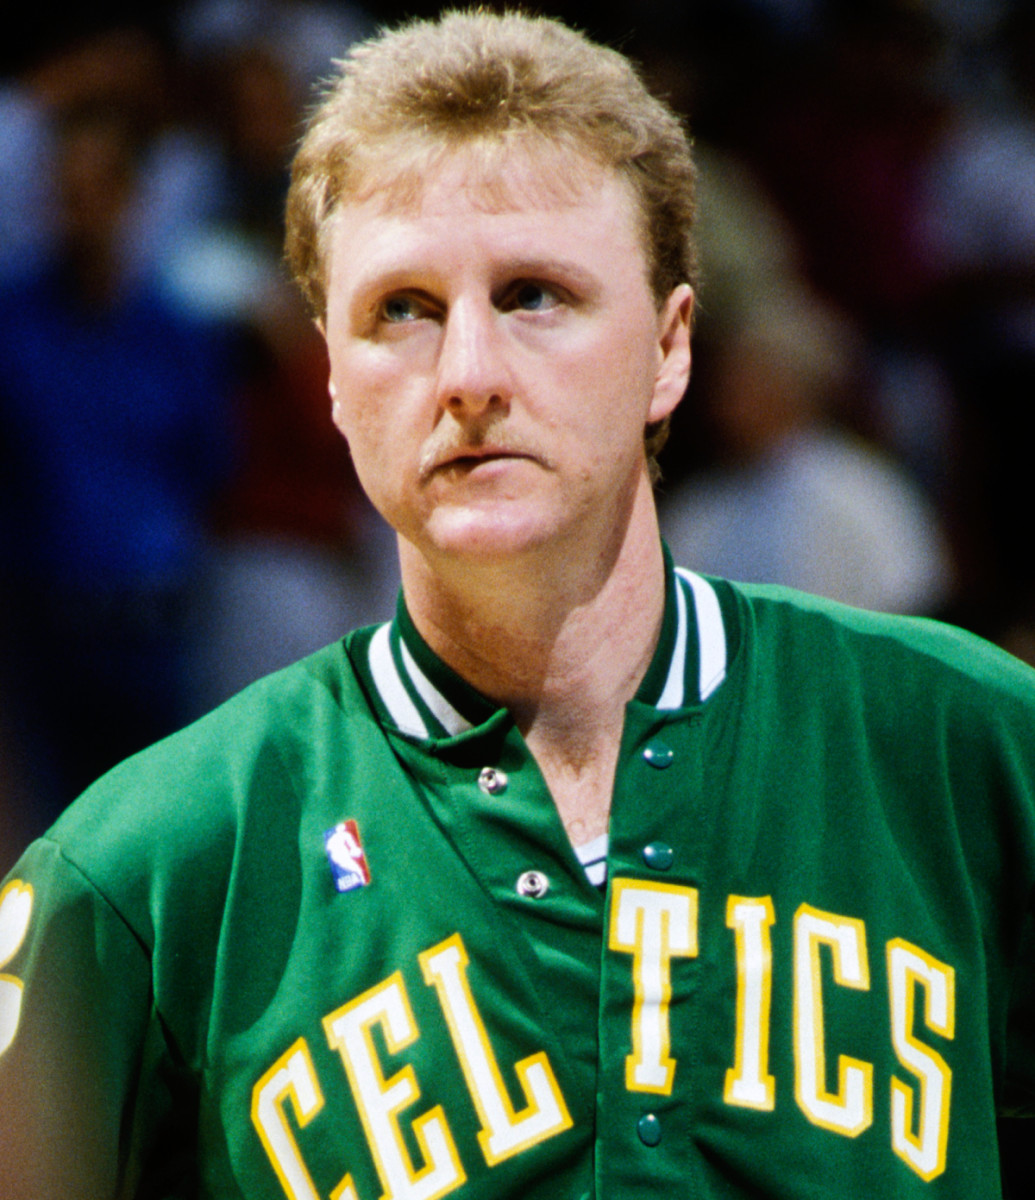 Larry Bird Told The Emotional Story Of How His Dad Walked From Home During The Game To Watch Him Break The High School County Record: "We Didn't Have No Car But He Walked Over. I Ended Up With 54 Points."